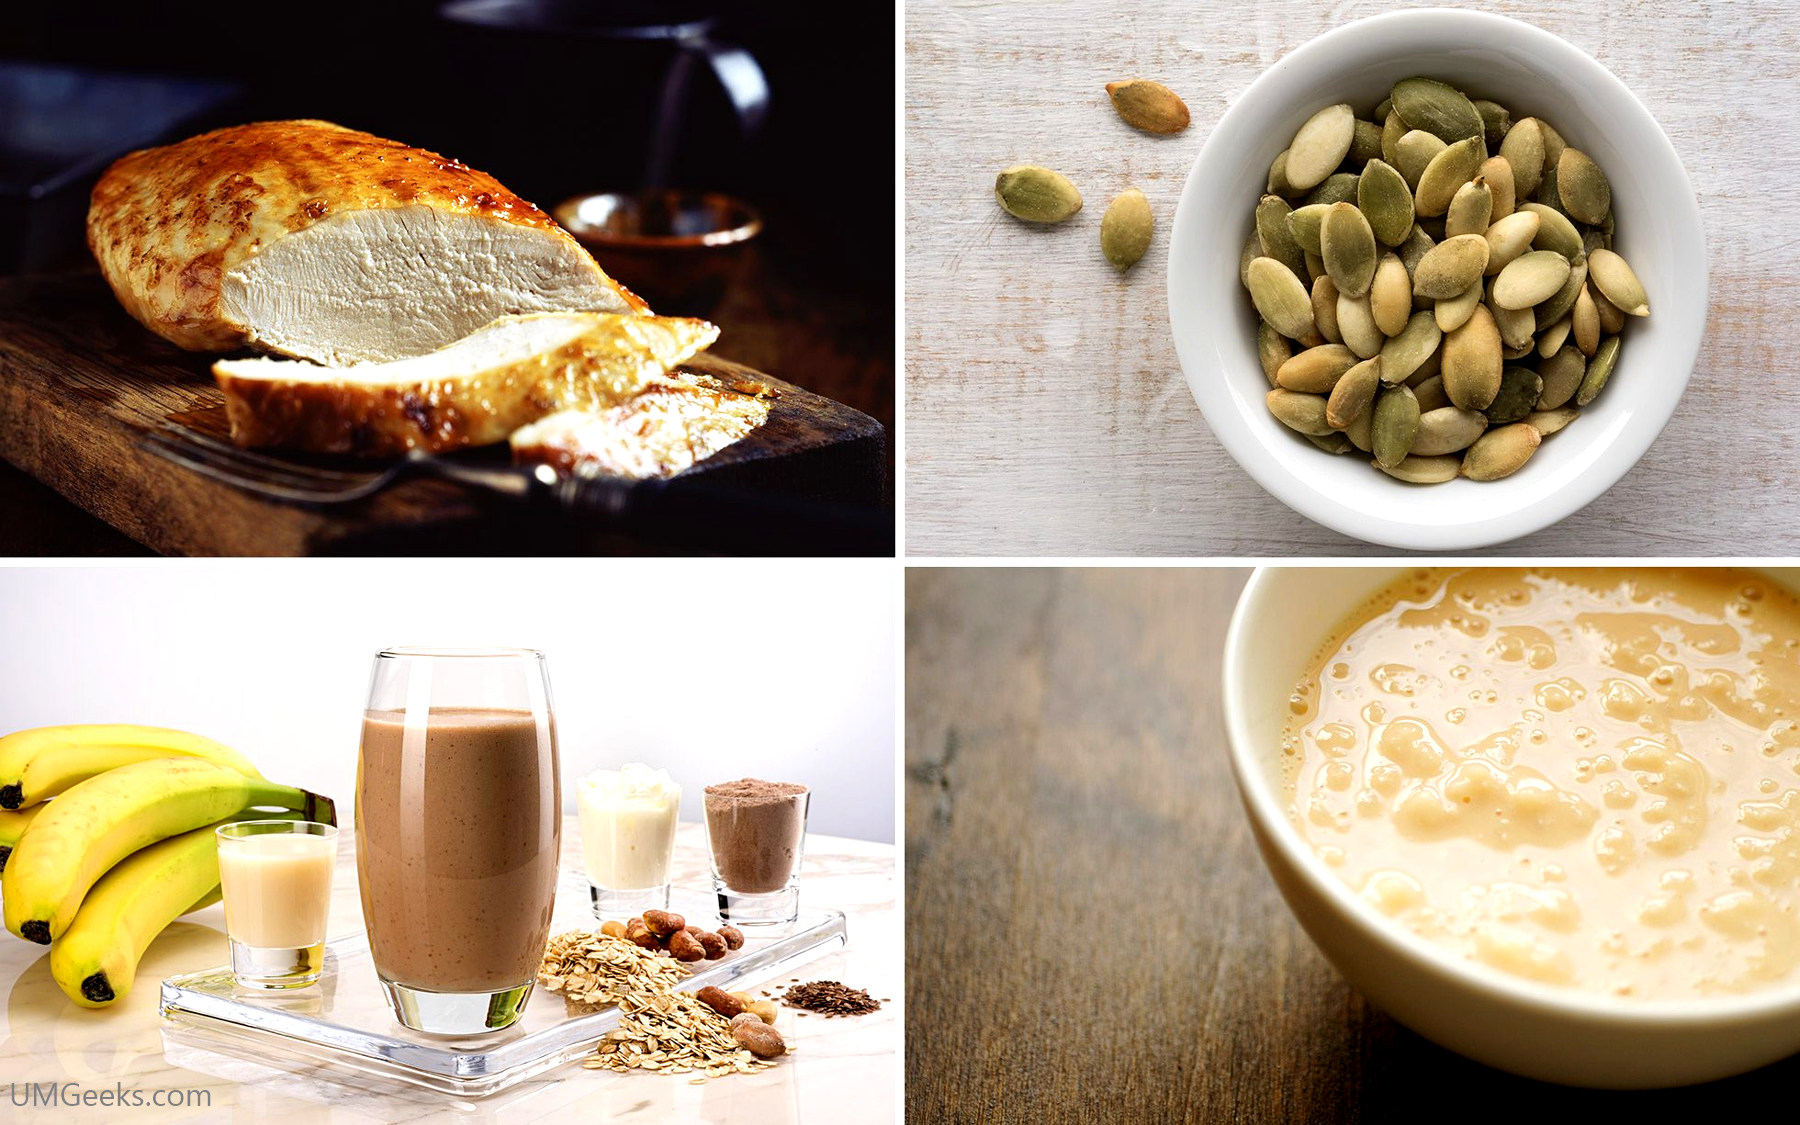 The Top 13 Night time Foods (Advice From a Health Coach)